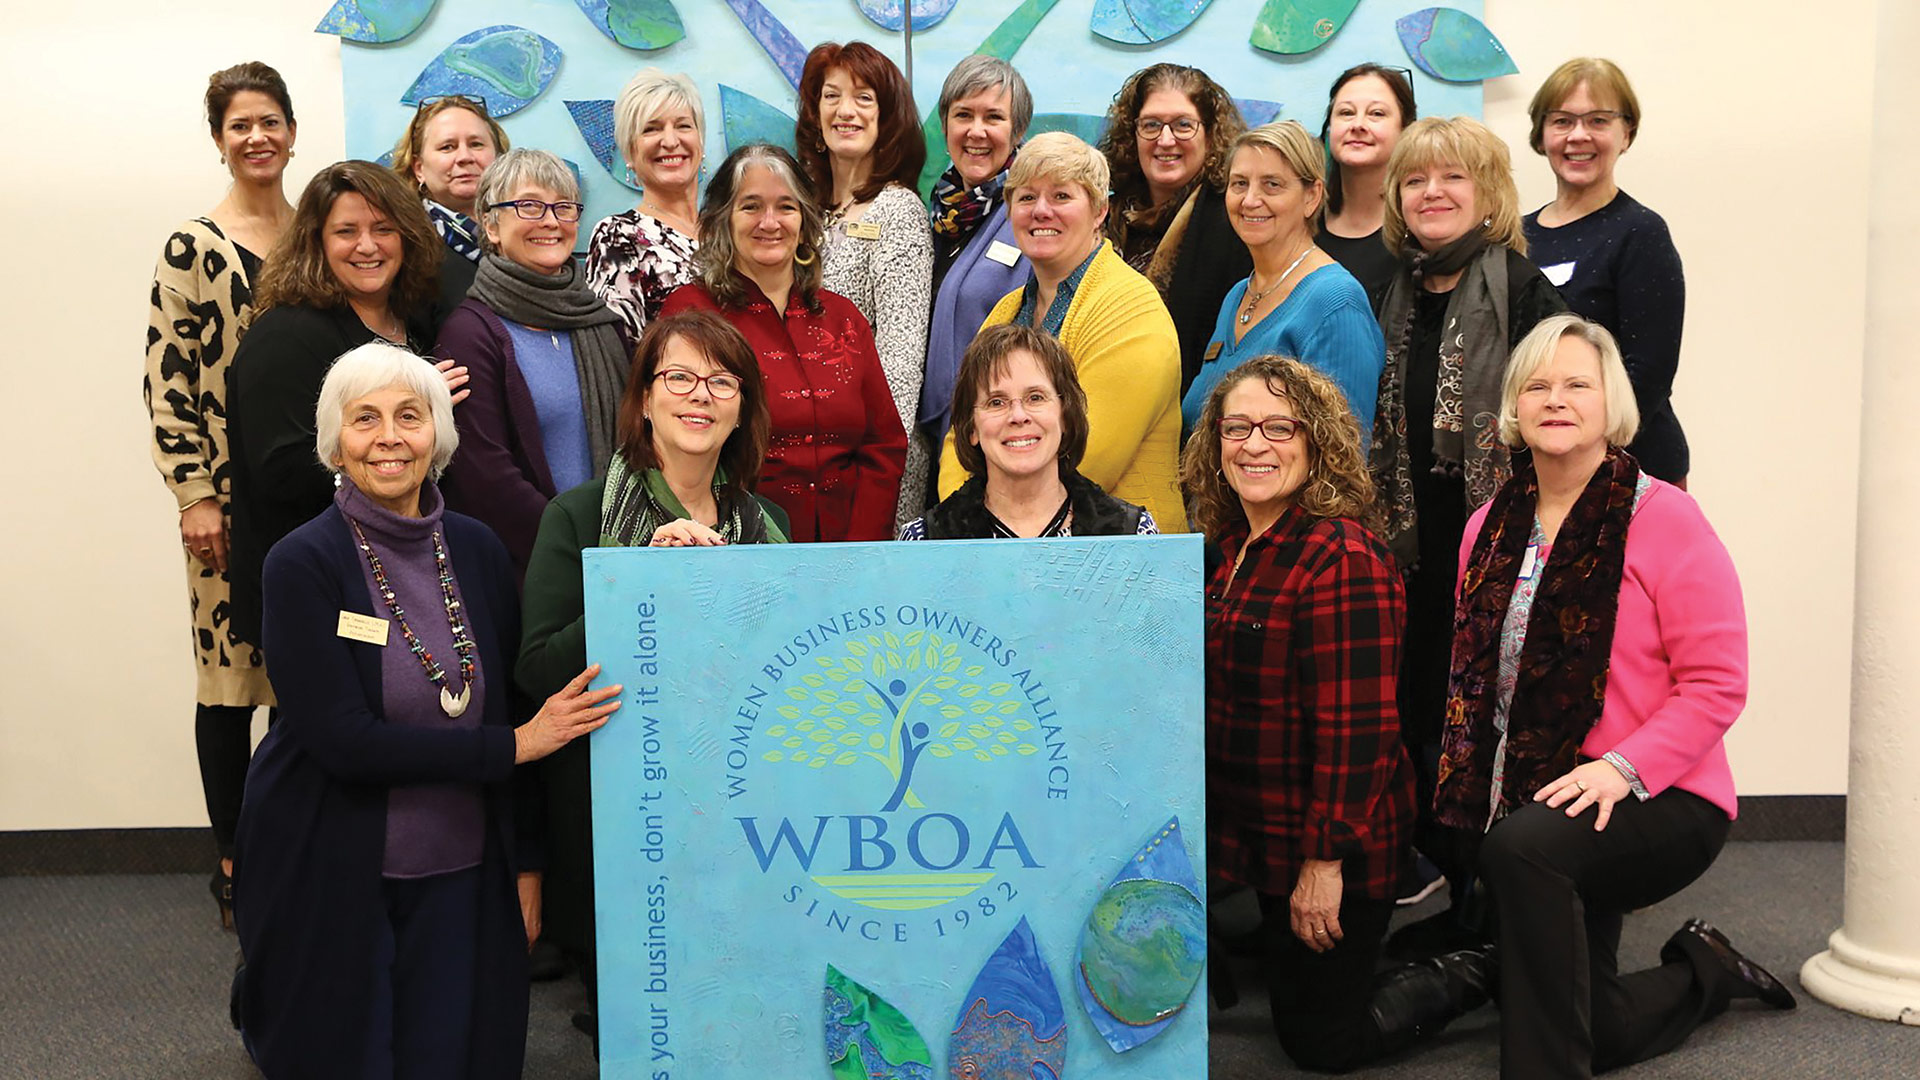 The WBOA team with a mural